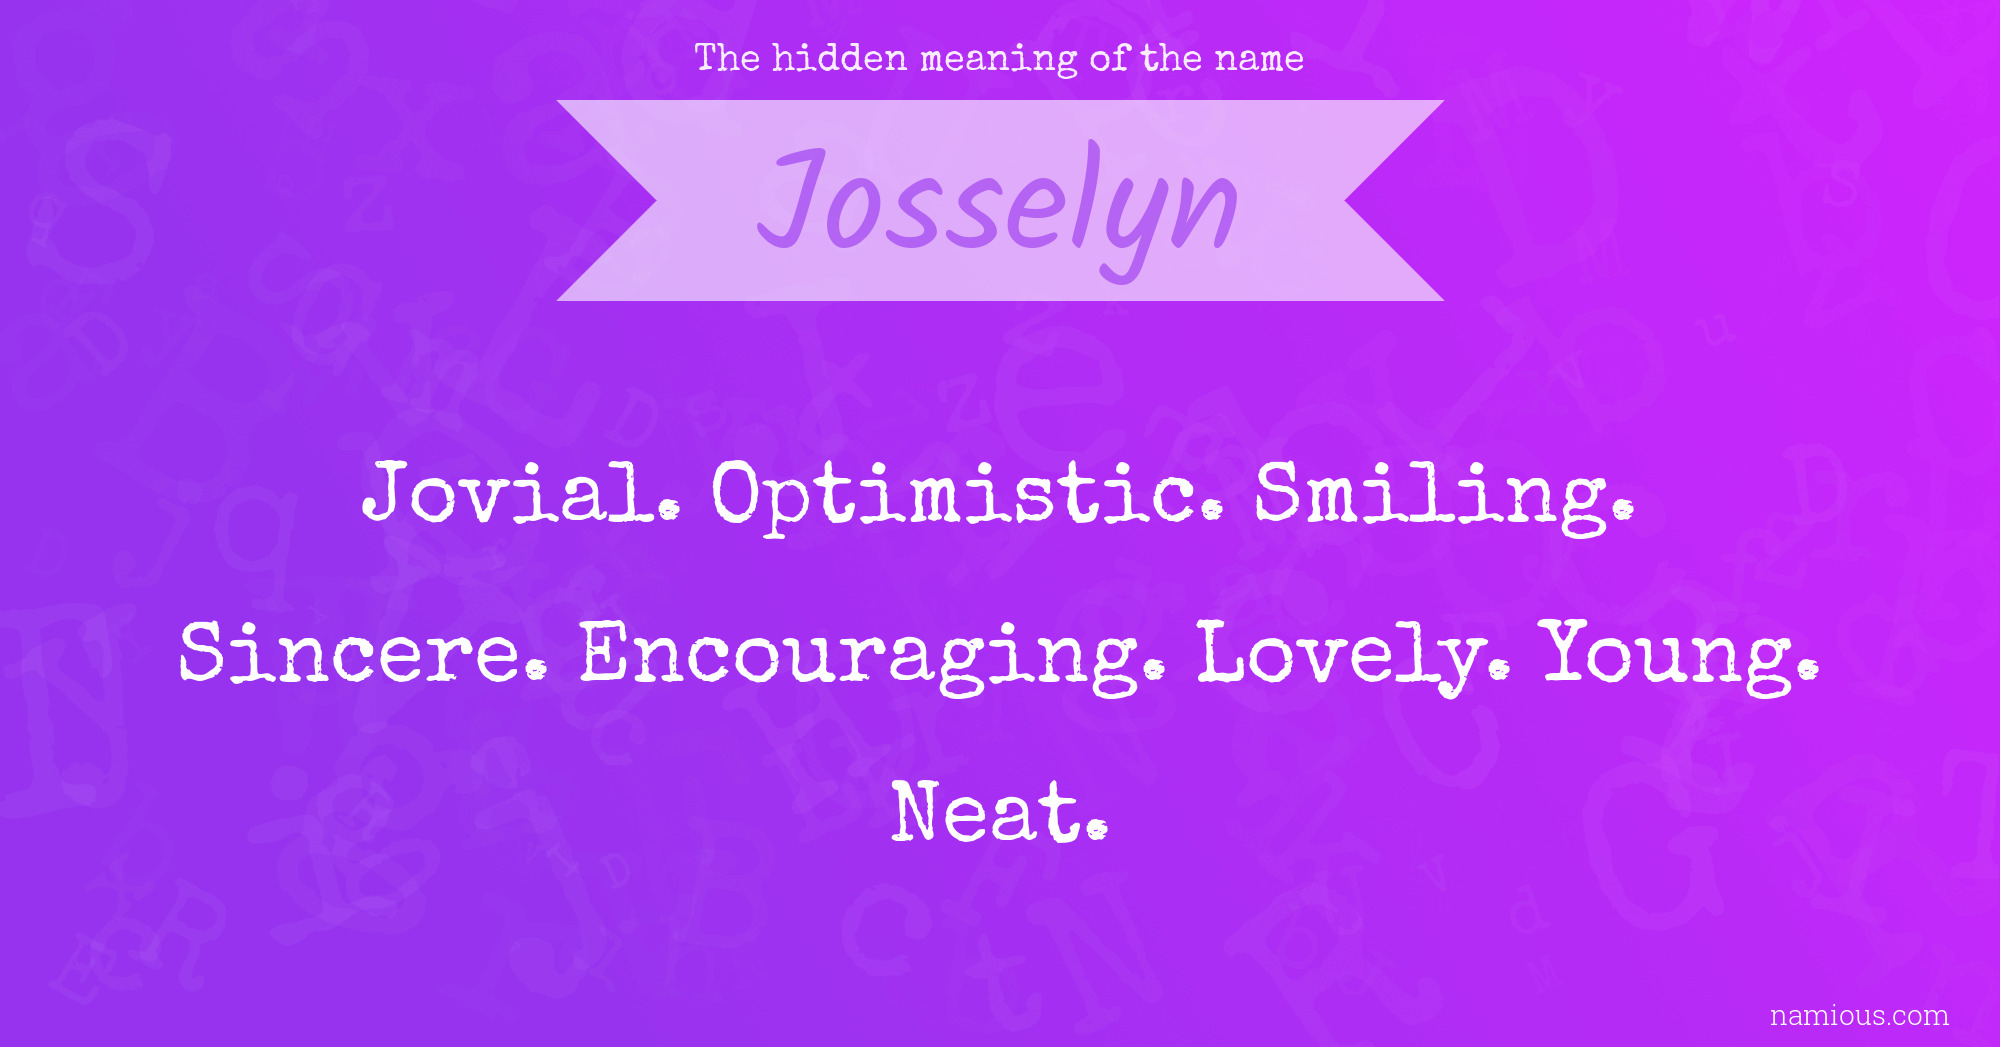 The hidden meaning of the name Josselyn